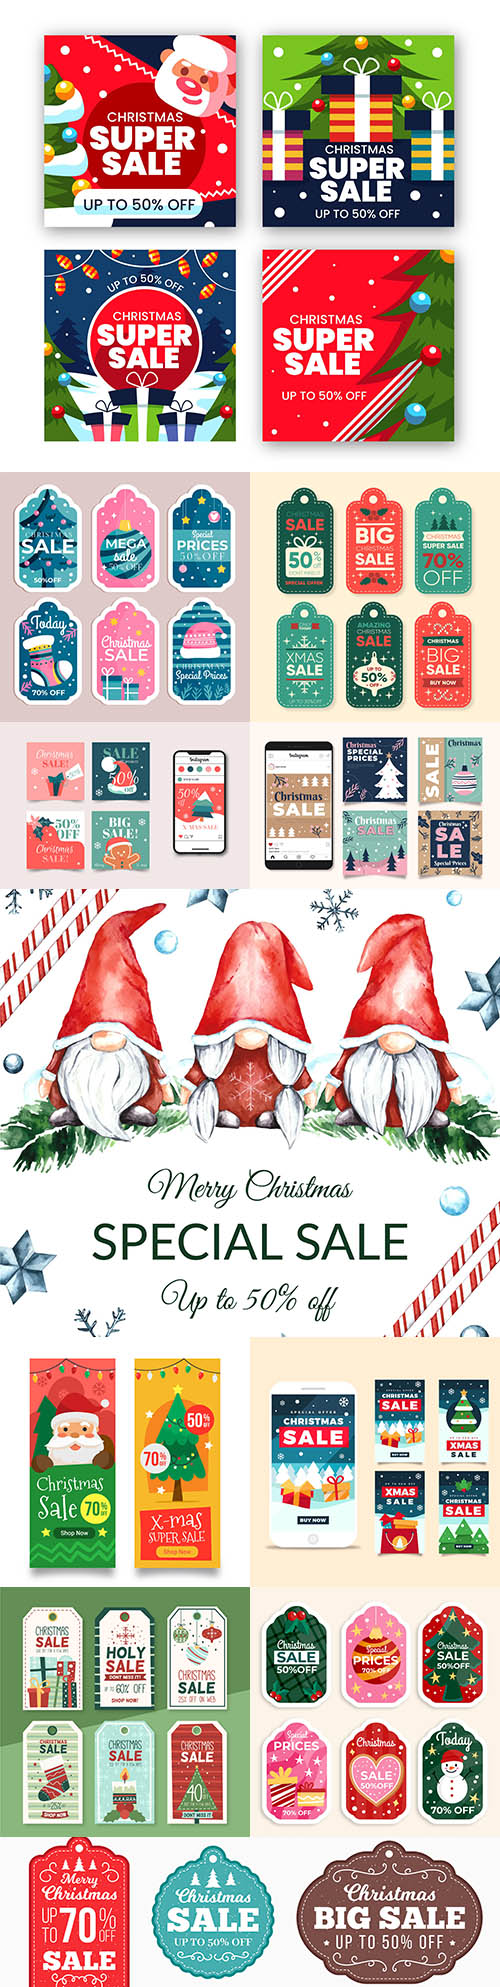 Christmas sale on instagram painted banners in flat design
